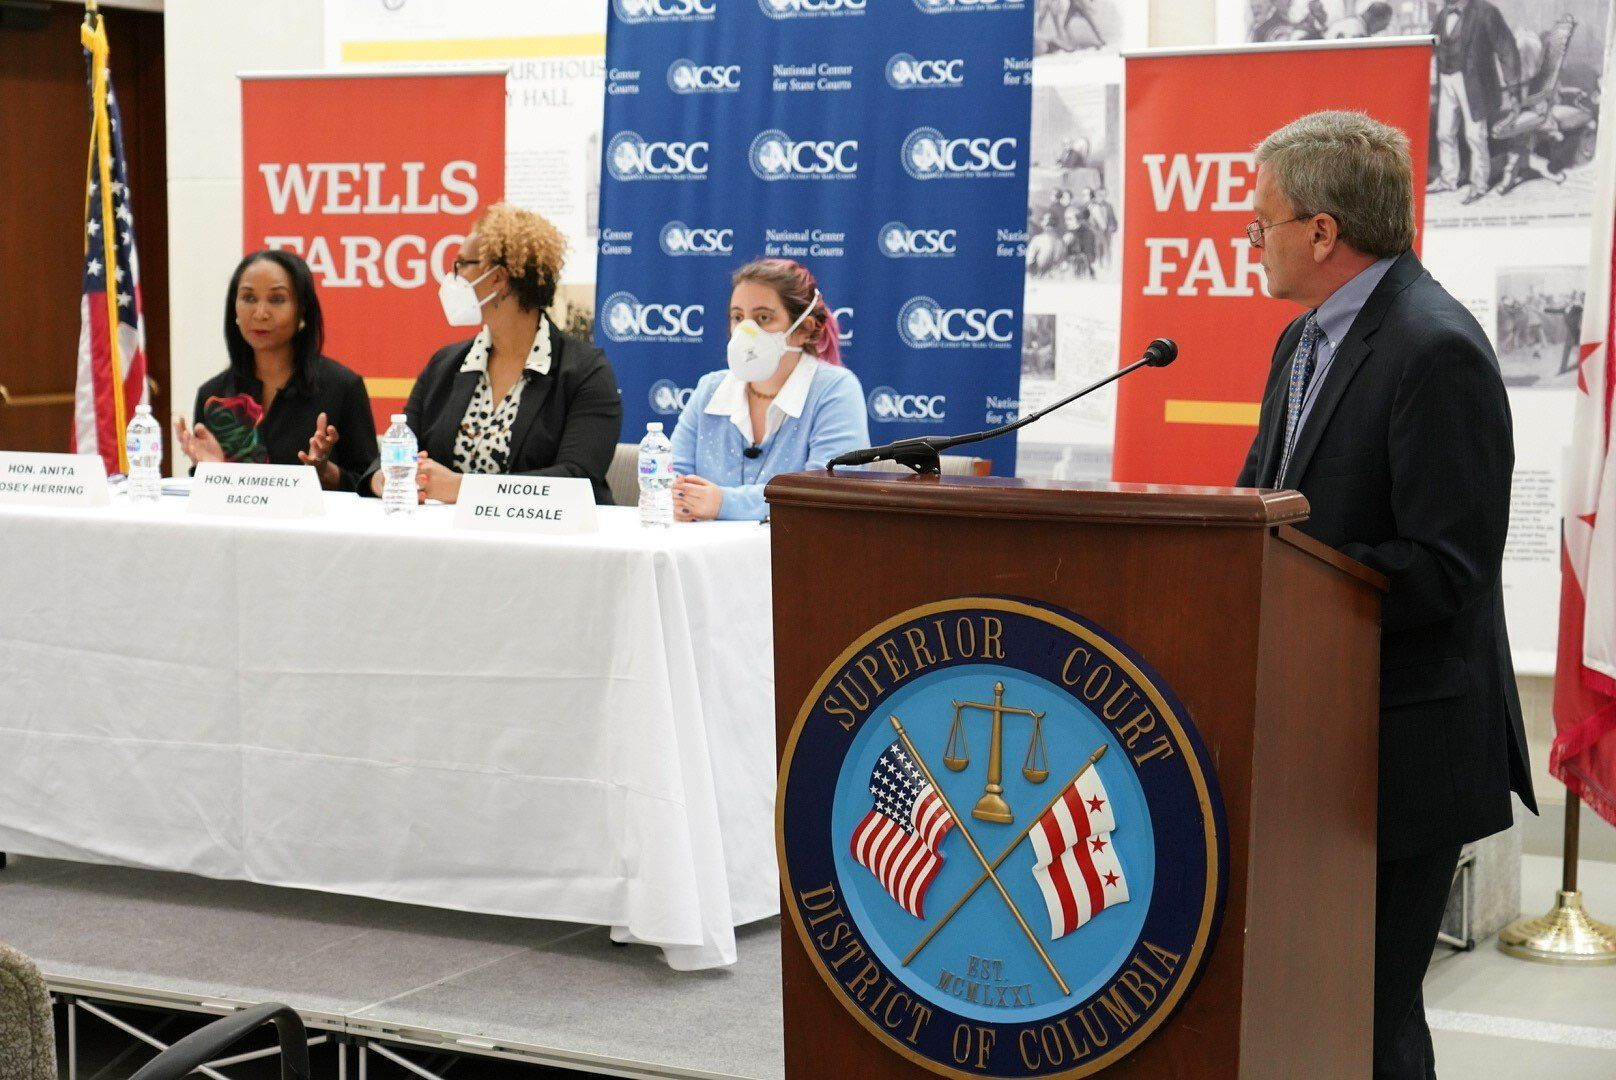 The National Center for State Courts (NCSC) announces a $10 million grant from the Wells Fargo Foundation alongside DC Court and National Center for State Courts representatives.